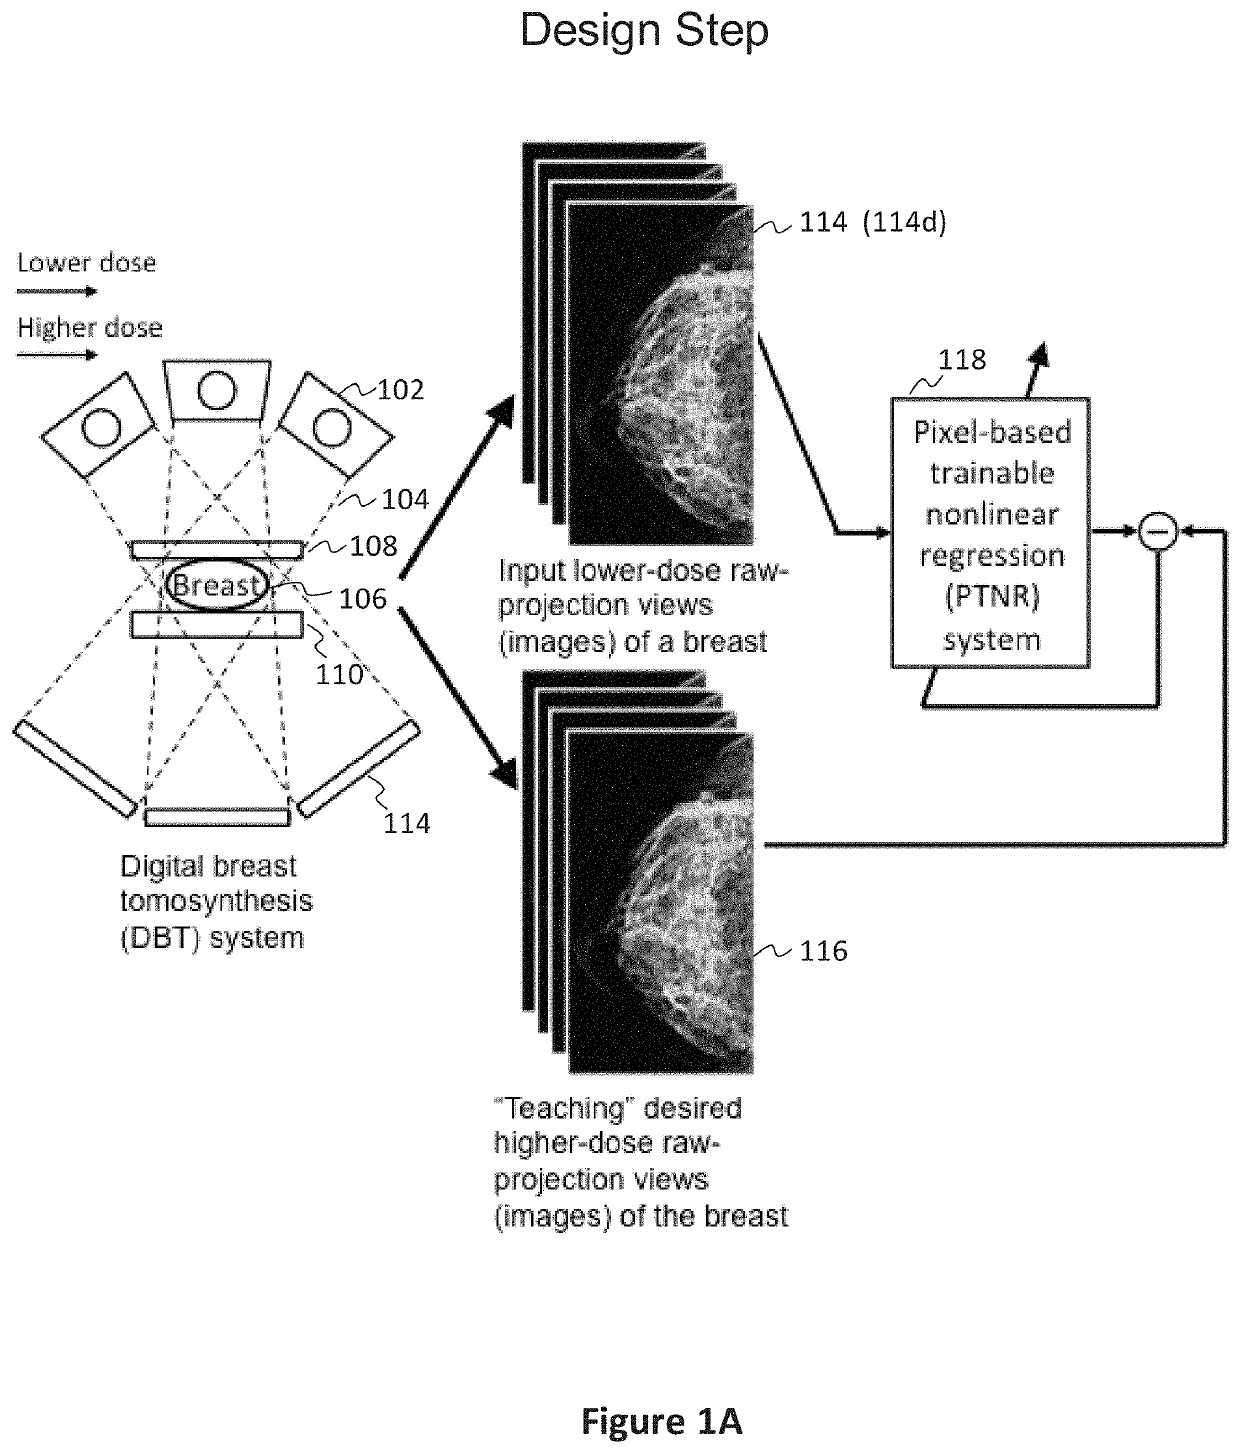 Converting low-dose to higher dose 3D tomosynthesis images through machine-learning processes